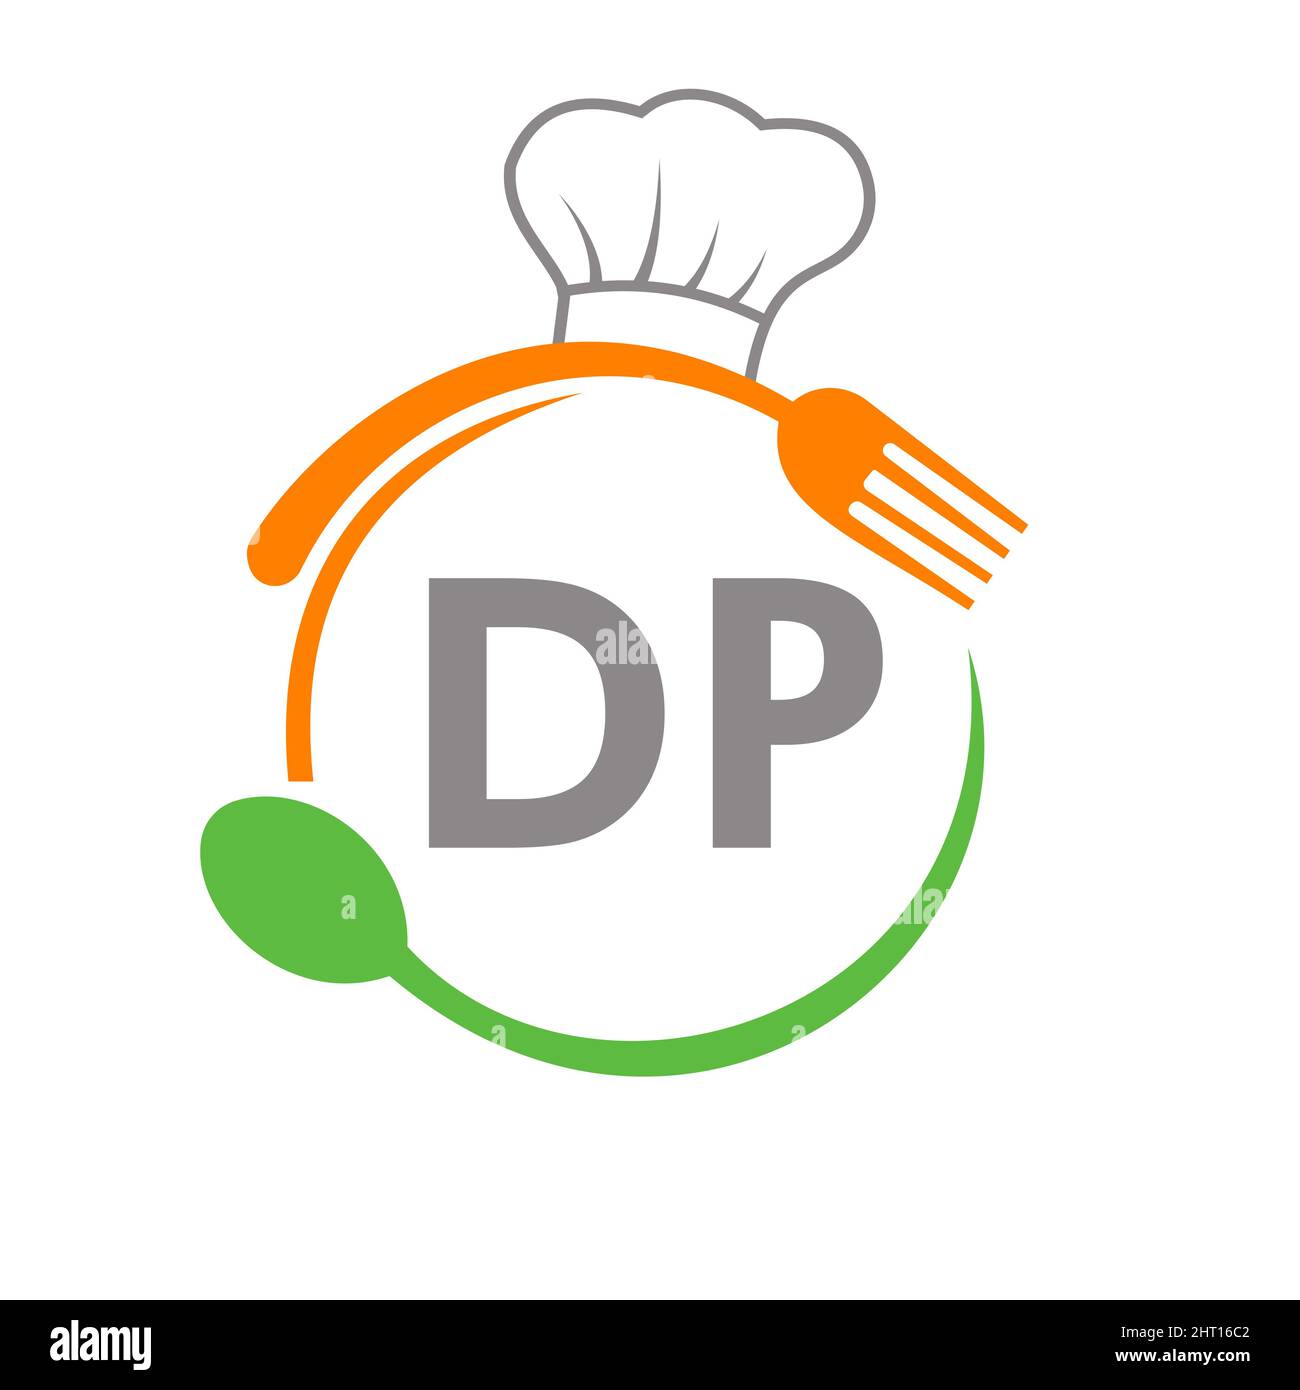 DP on Barbecue